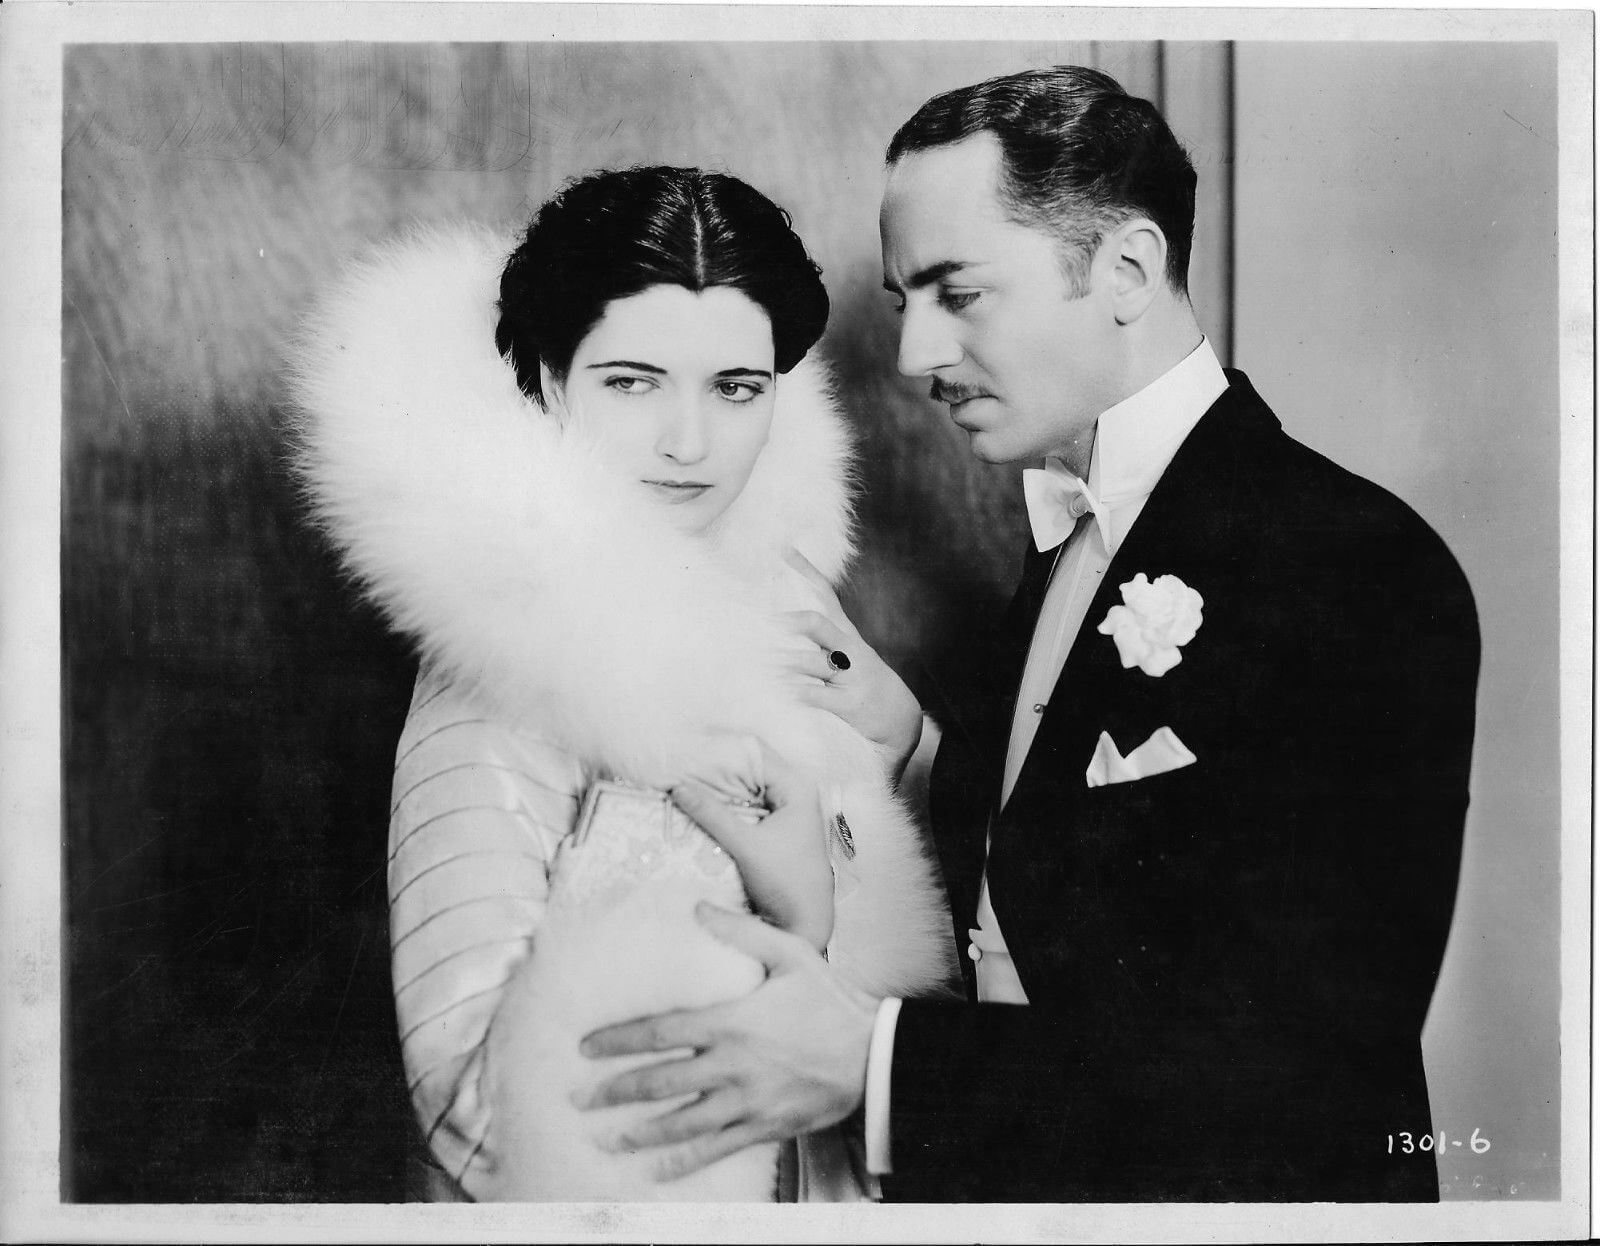 The actress Kay Francis. Entire articles have been devoted to her use of fur as prop.